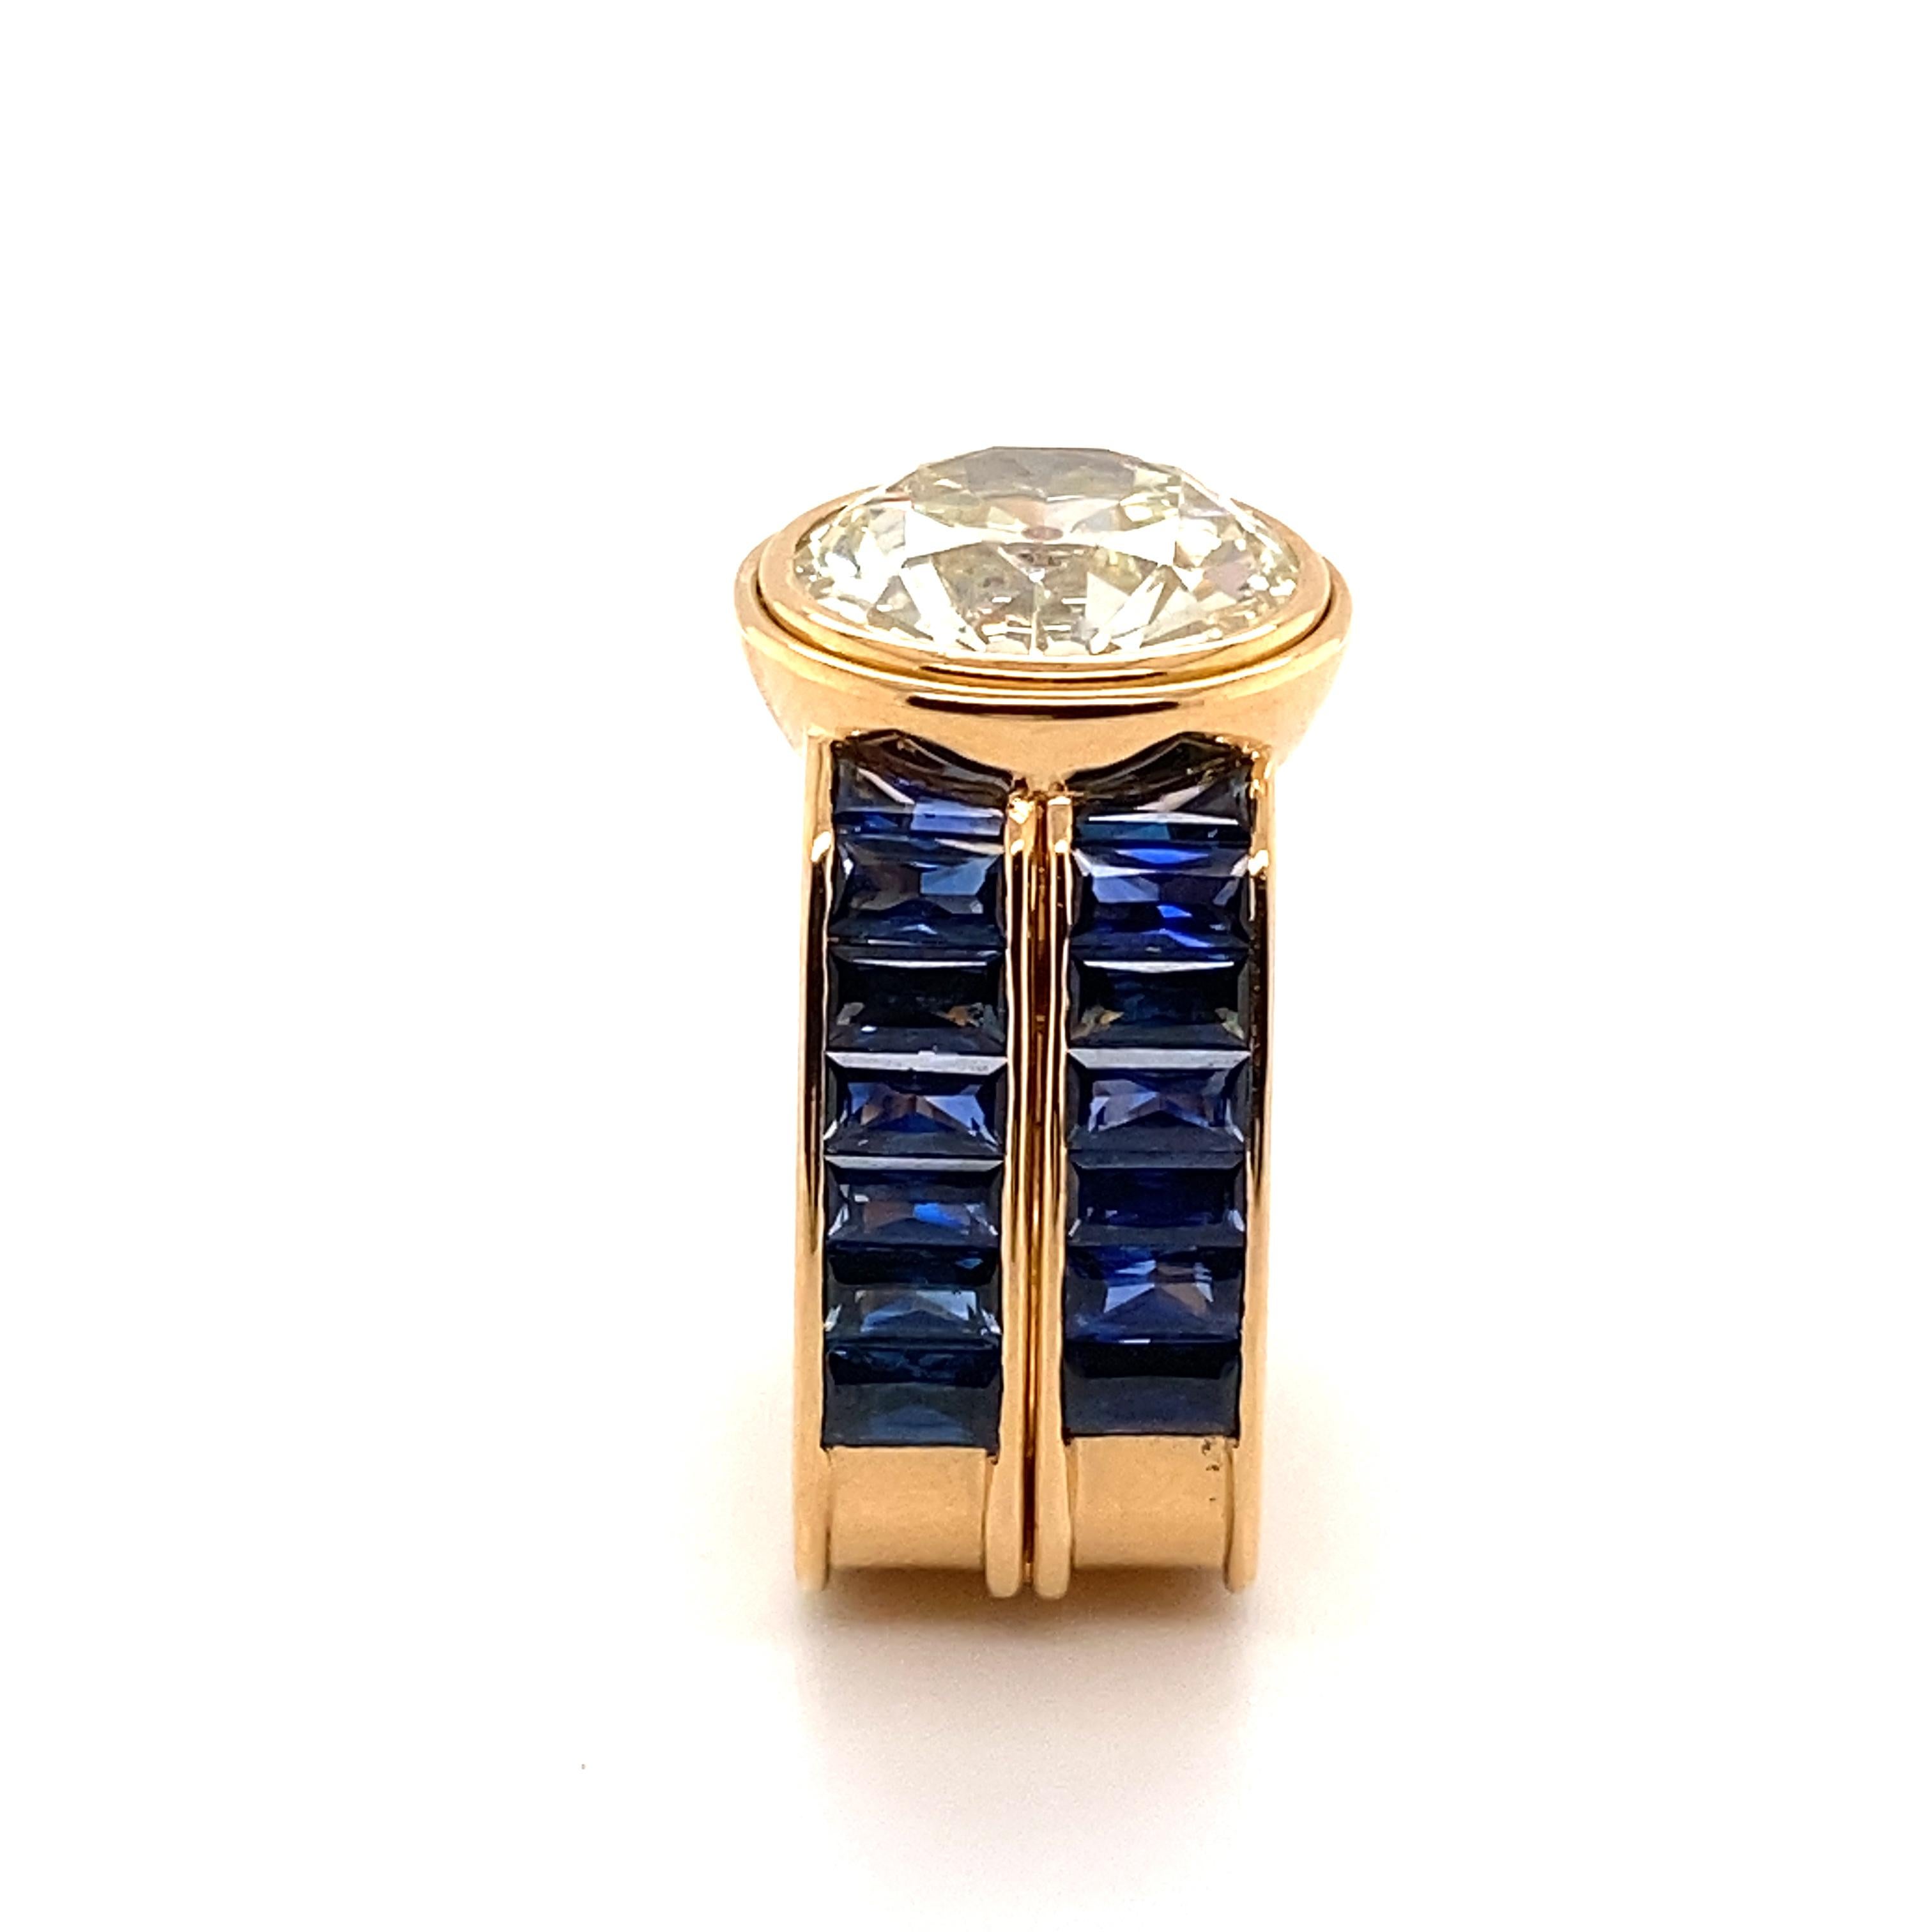 Magnificent Old European Cut Diamond and Sapphire Ring For Sale 3